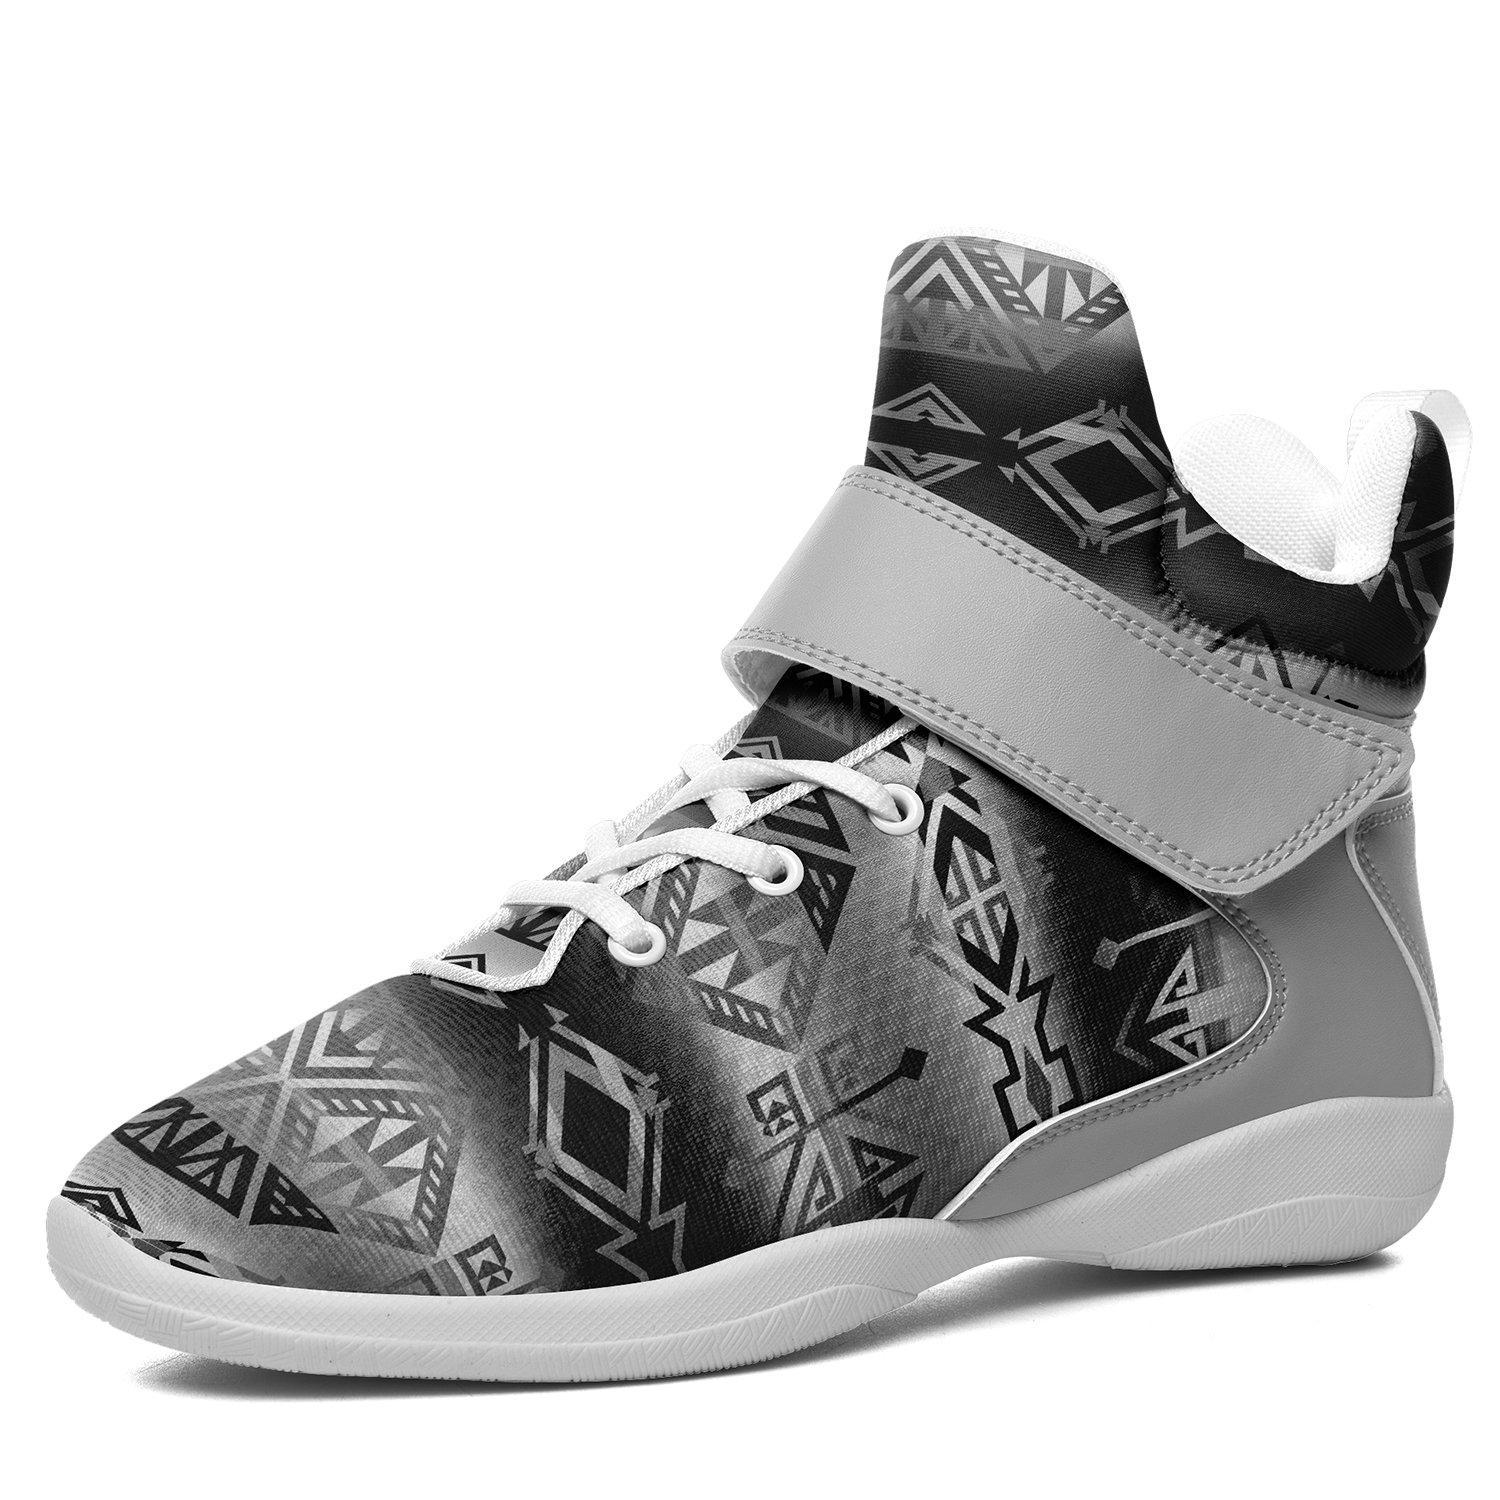 Trade Route Cave Ipottaa Basketball / Sport High Top Shoes - White Sole 49 Dzine US Men 7 / EUR 40 White Sole with Gray Strap 